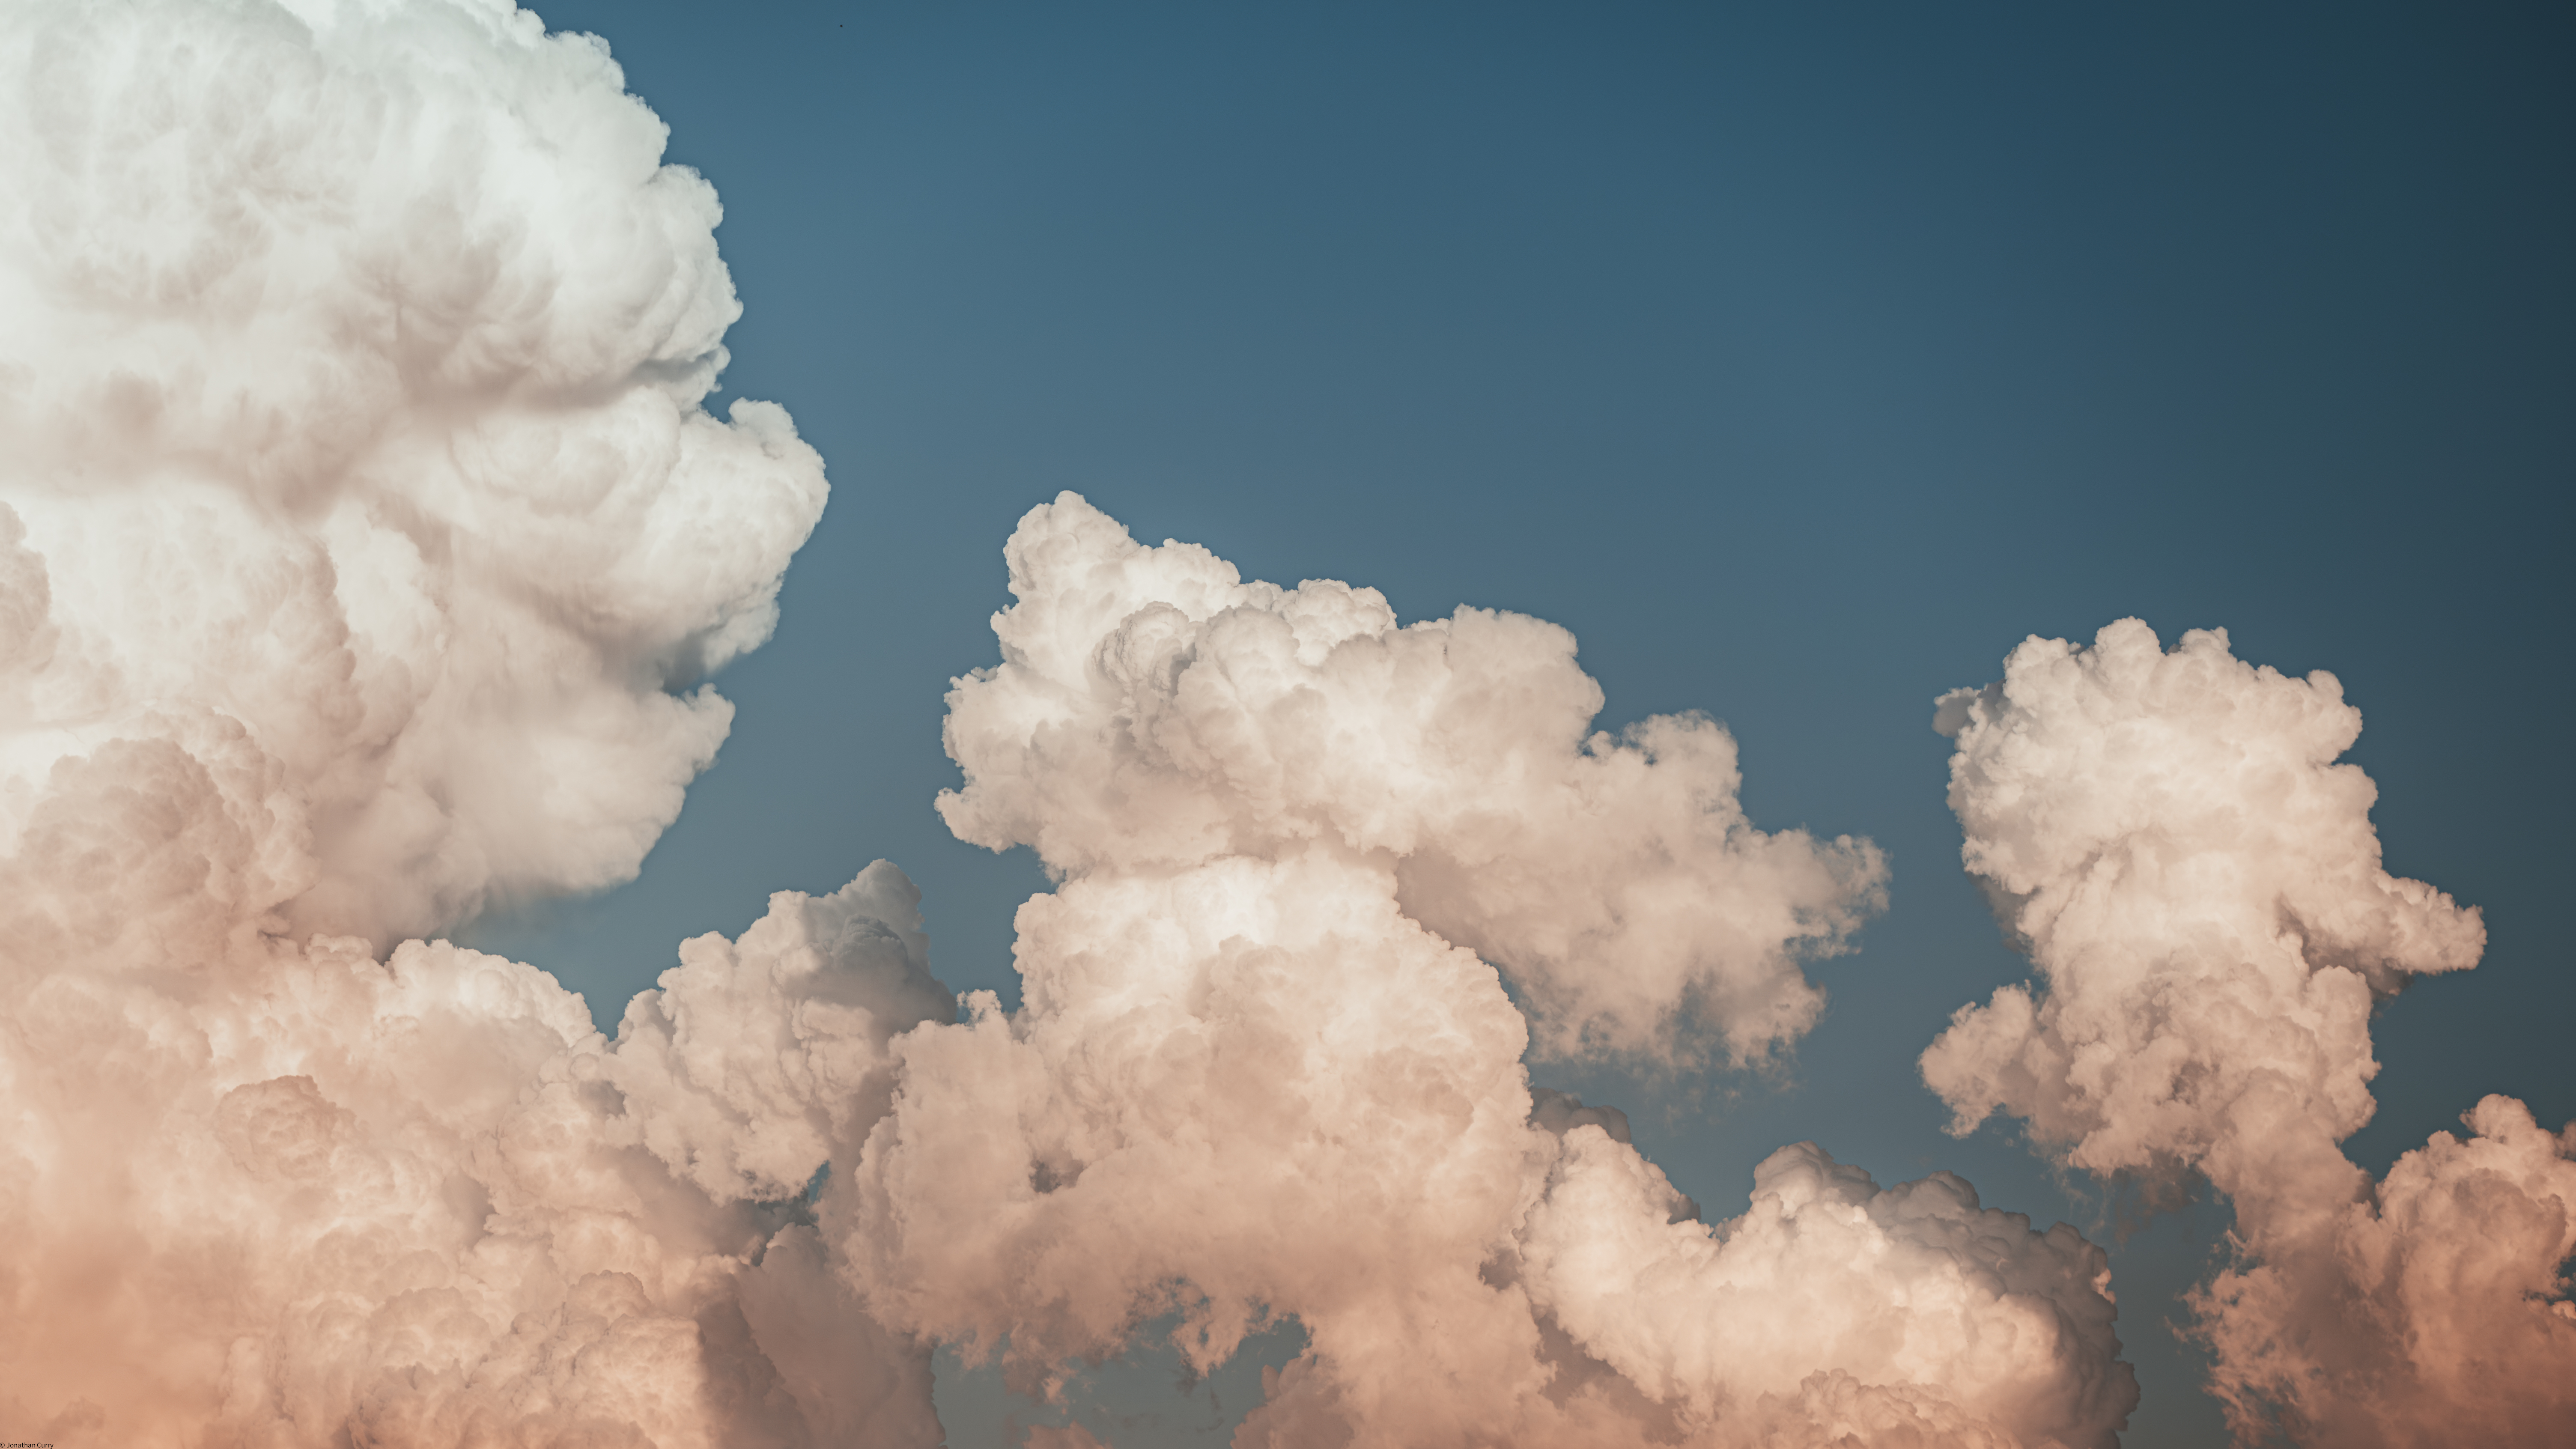 General 6016x3384 clouds Jonathan Curry nature sky outdoors photography vintage landscape natural light bright